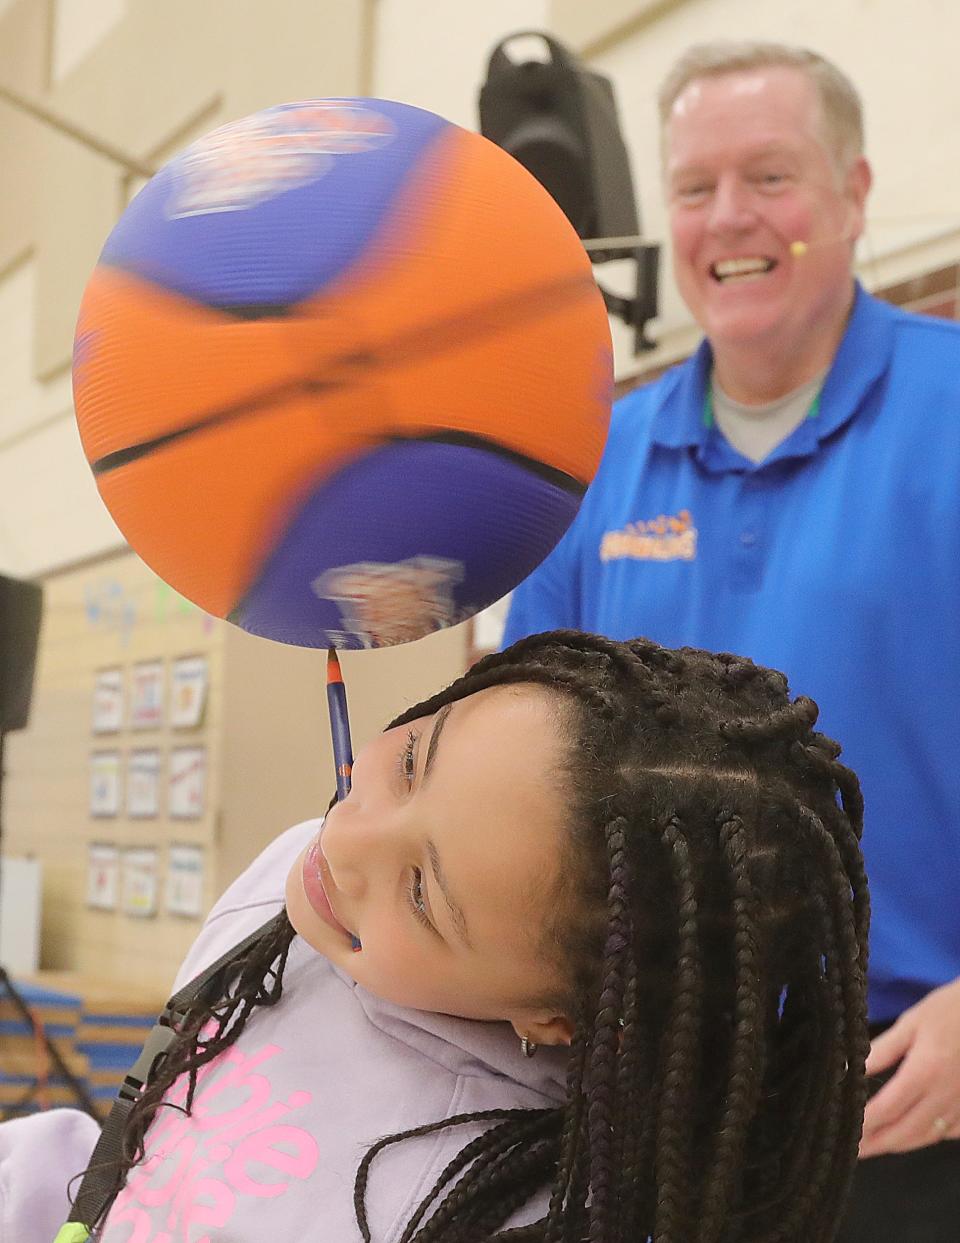 McKenzie Beverly-White holds a pen in her mouth to balance a spinning basketball during a performance with Jim "Basketball" Jones at Herberich Primary School on Tuesday in Fairlawn.